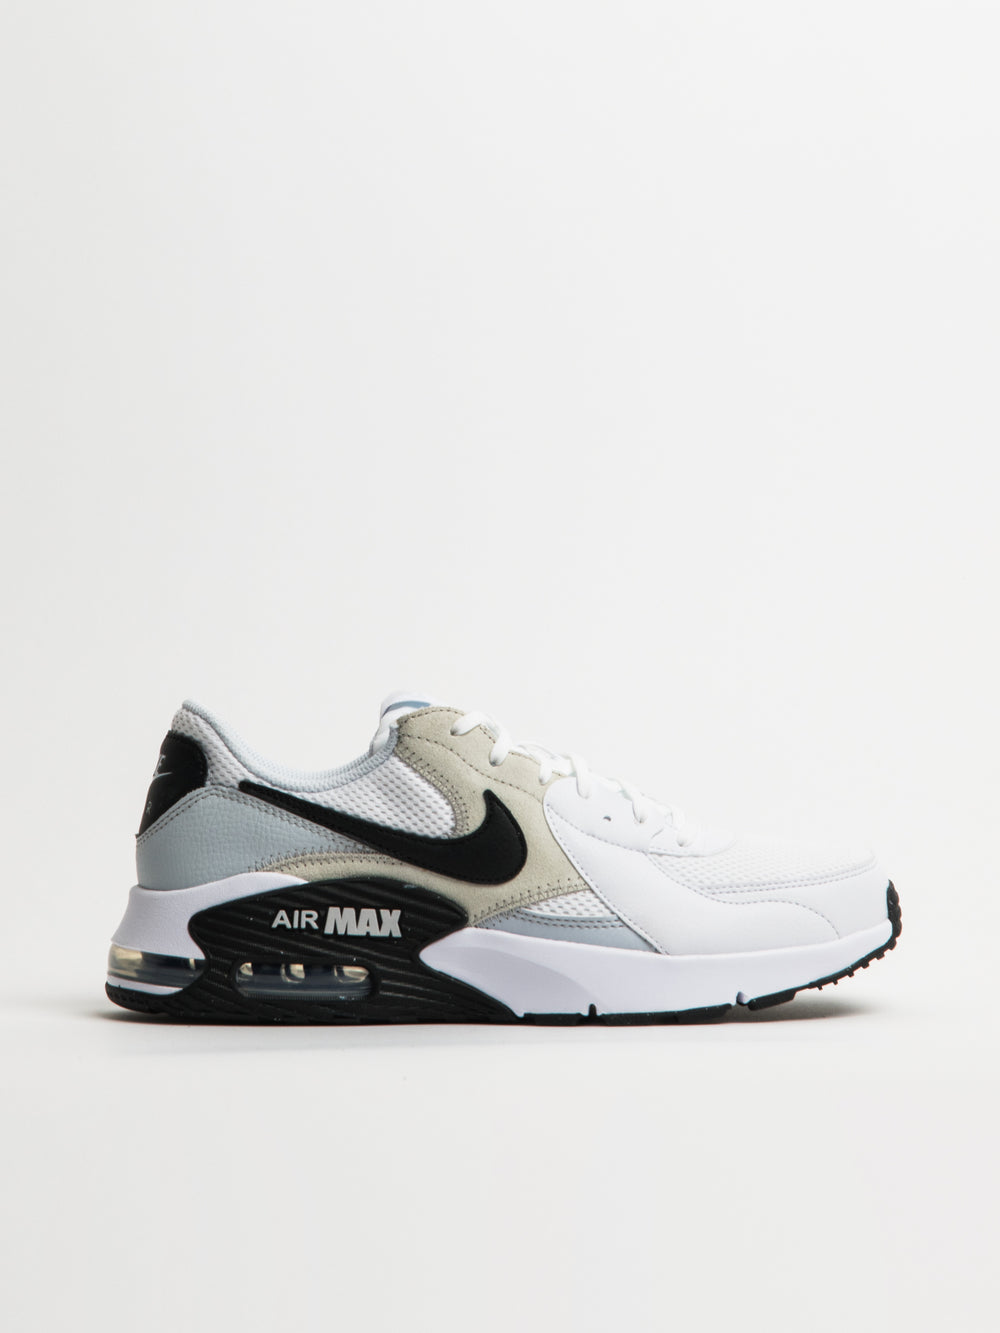 CHAUSSURES DE SPORT NIKE AIR MAX EXCEE POUR HOMMES